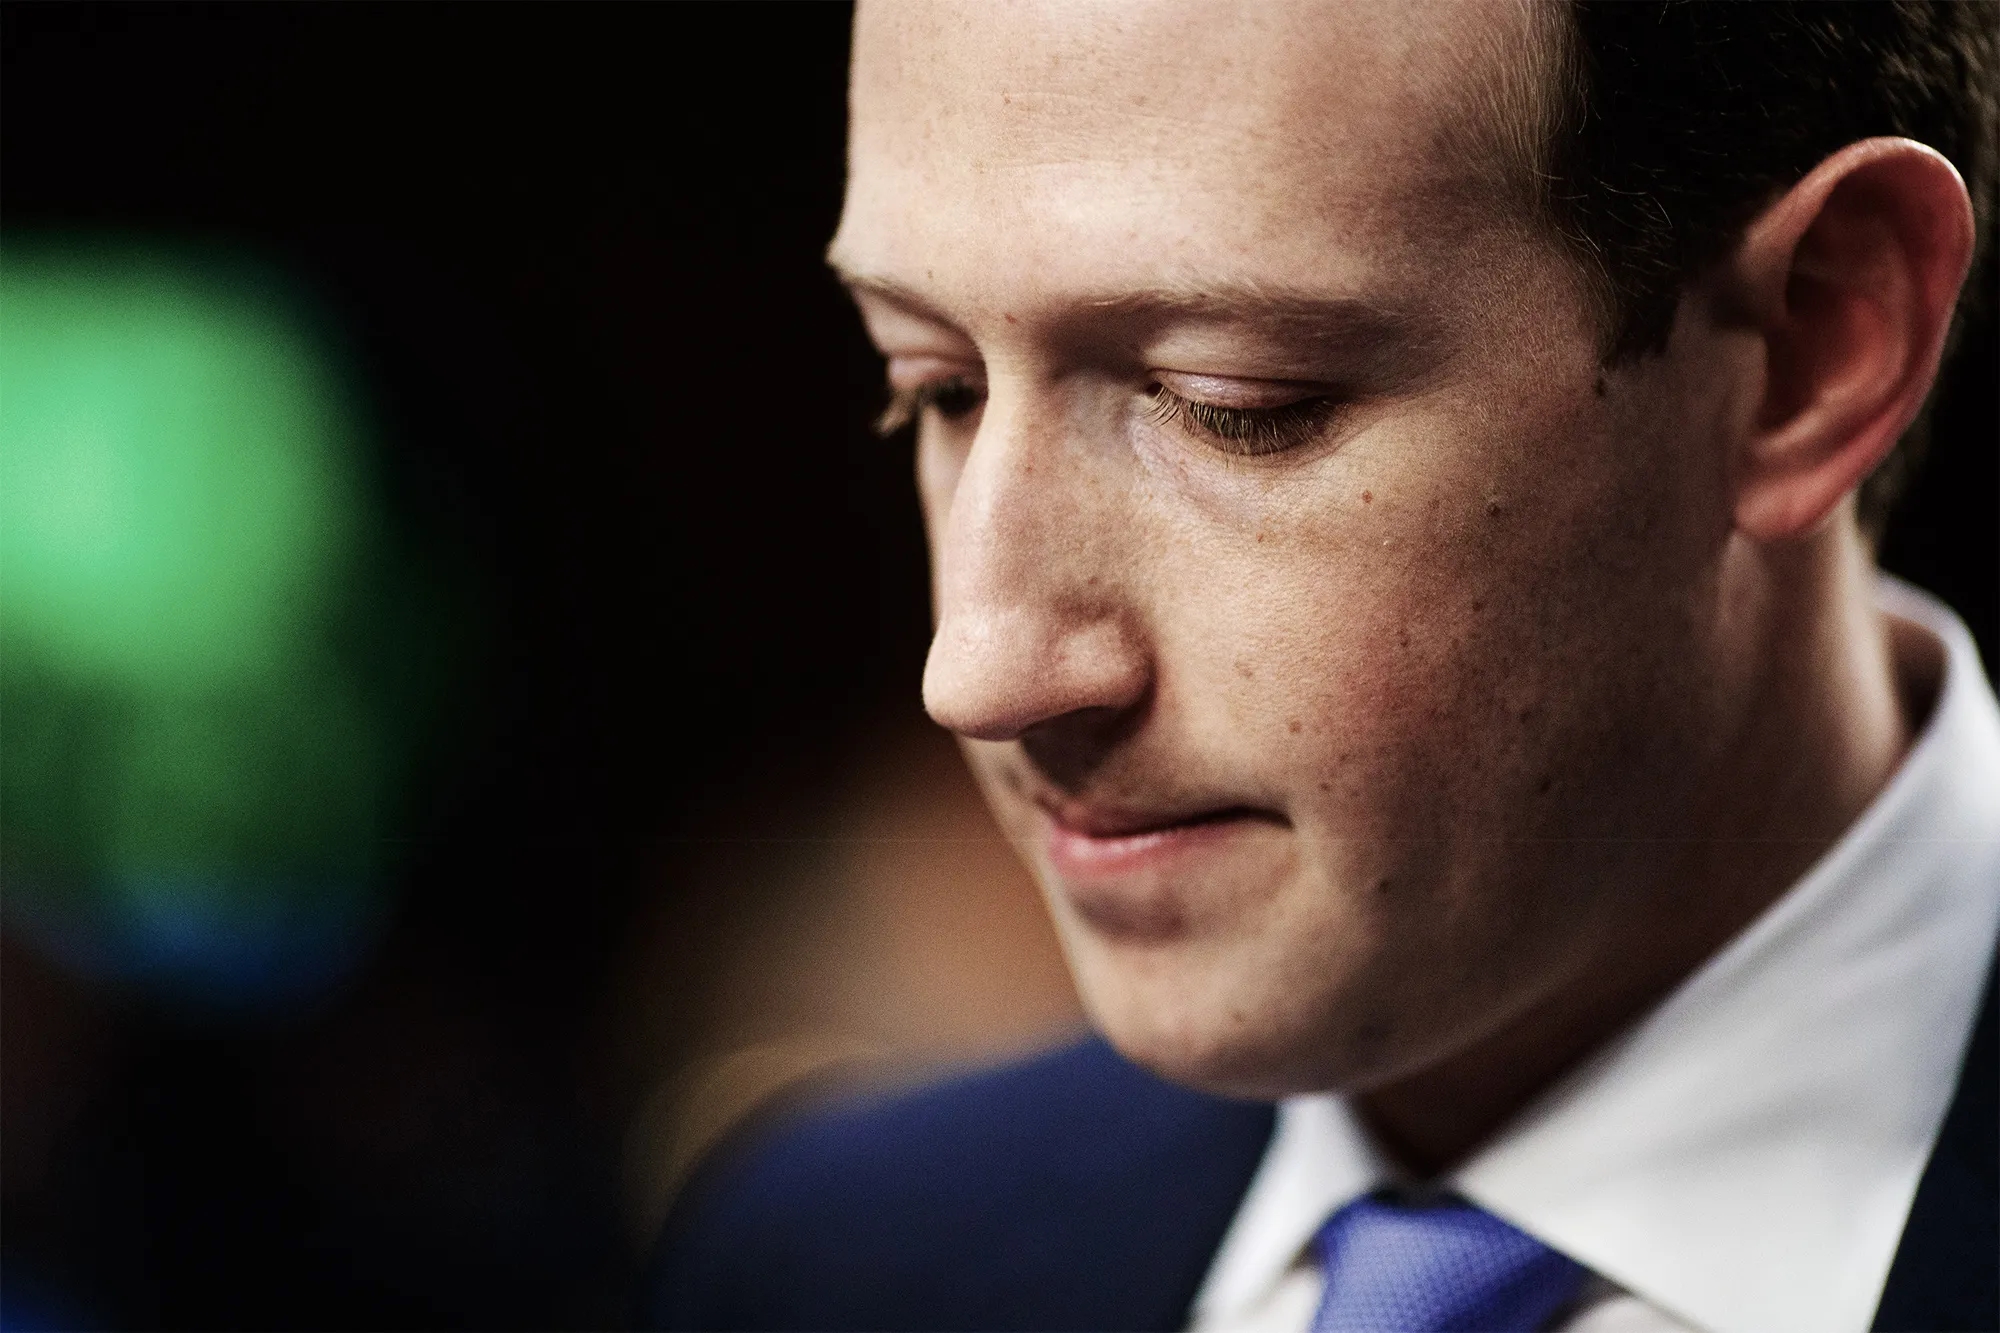 Zuckerberg May Be Getting The Pushback He Deserves